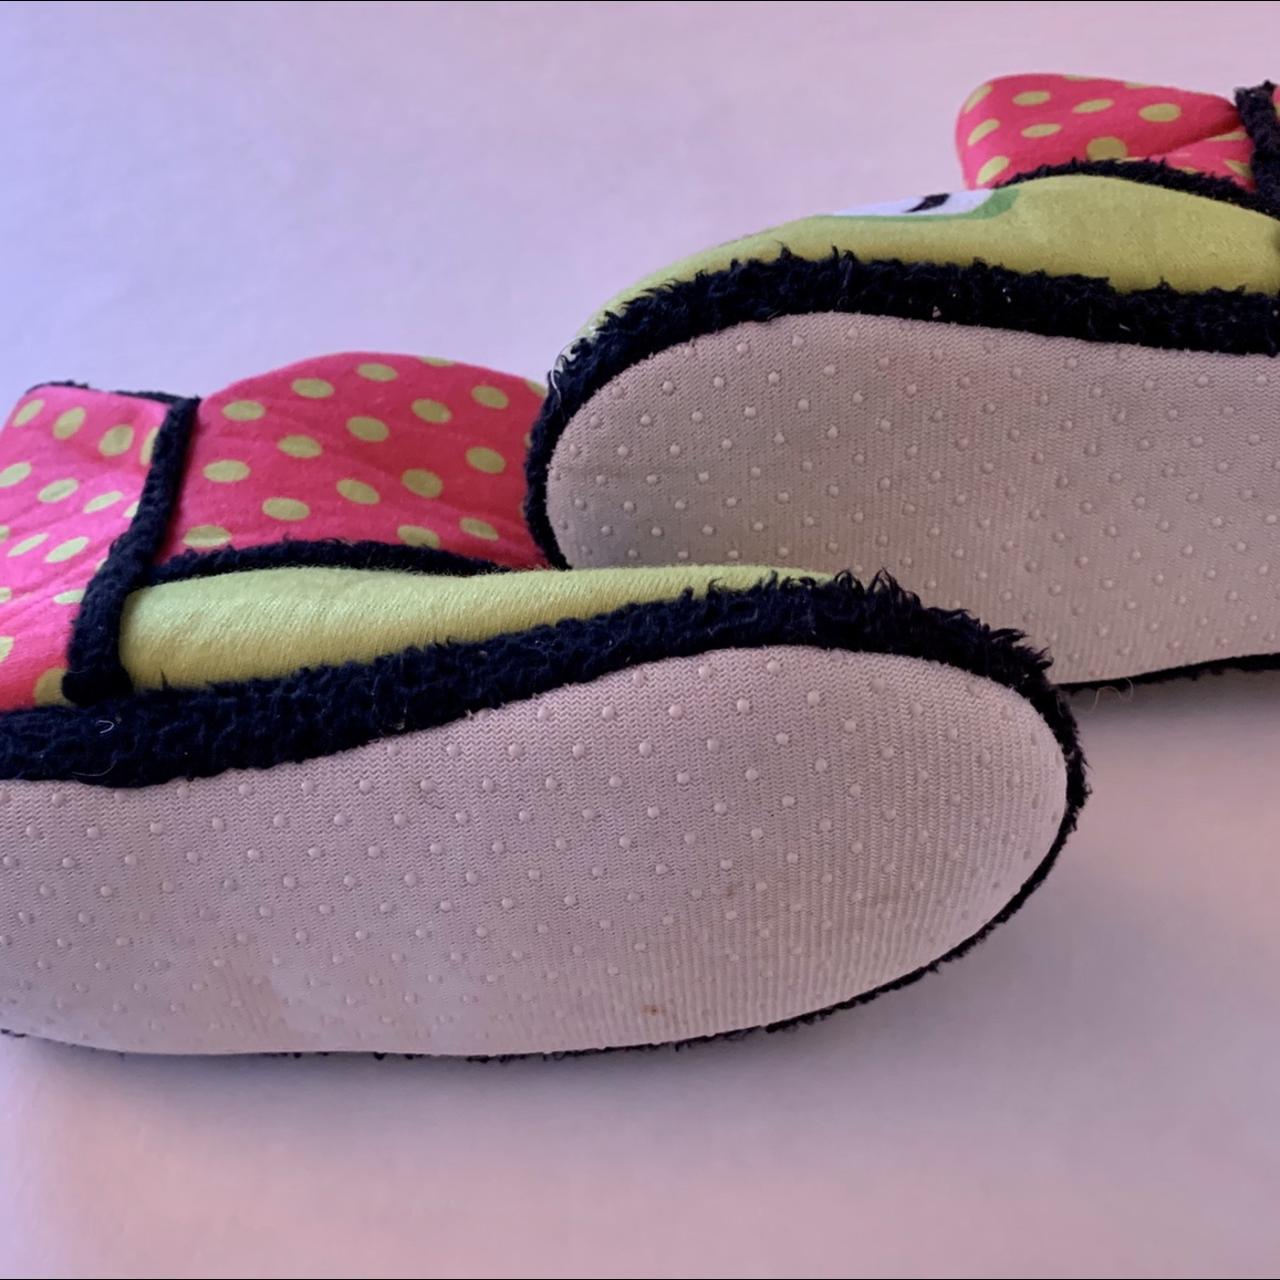 Product Image 3 - #Froggy #Slippers. Size #11/12. Very